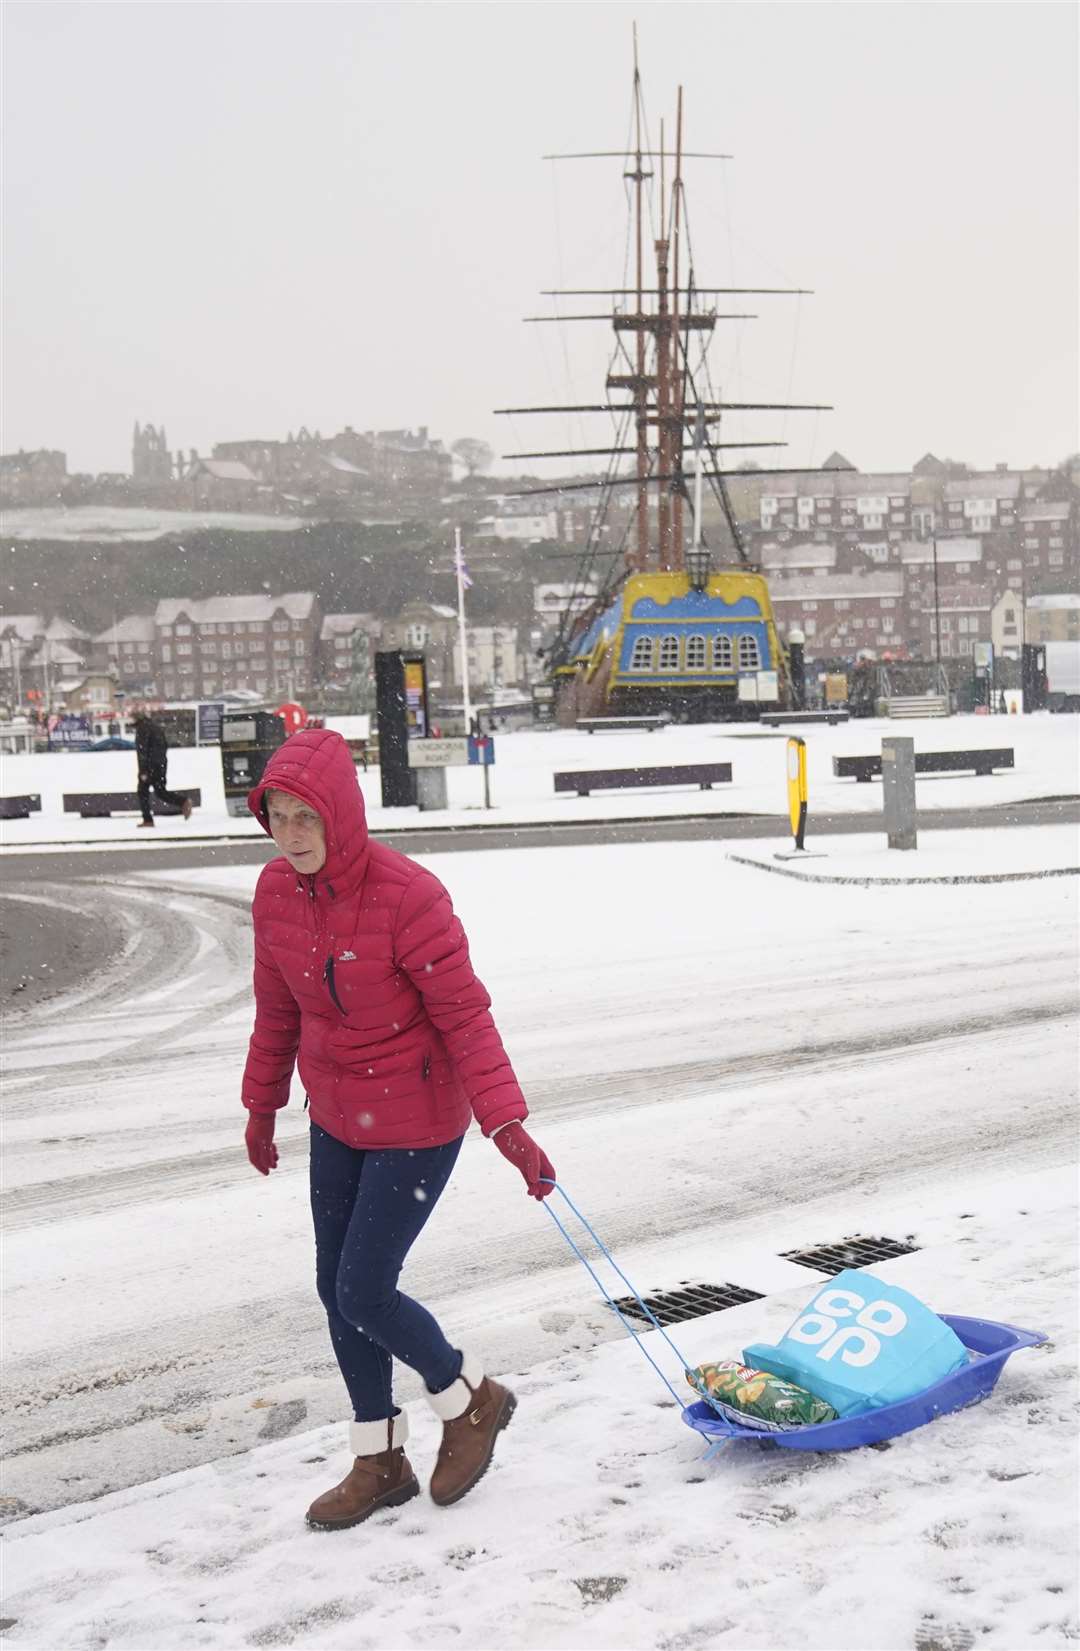 Shopping with a sledge in Whitby, North Yorkshire (Danny Lawson/PA)